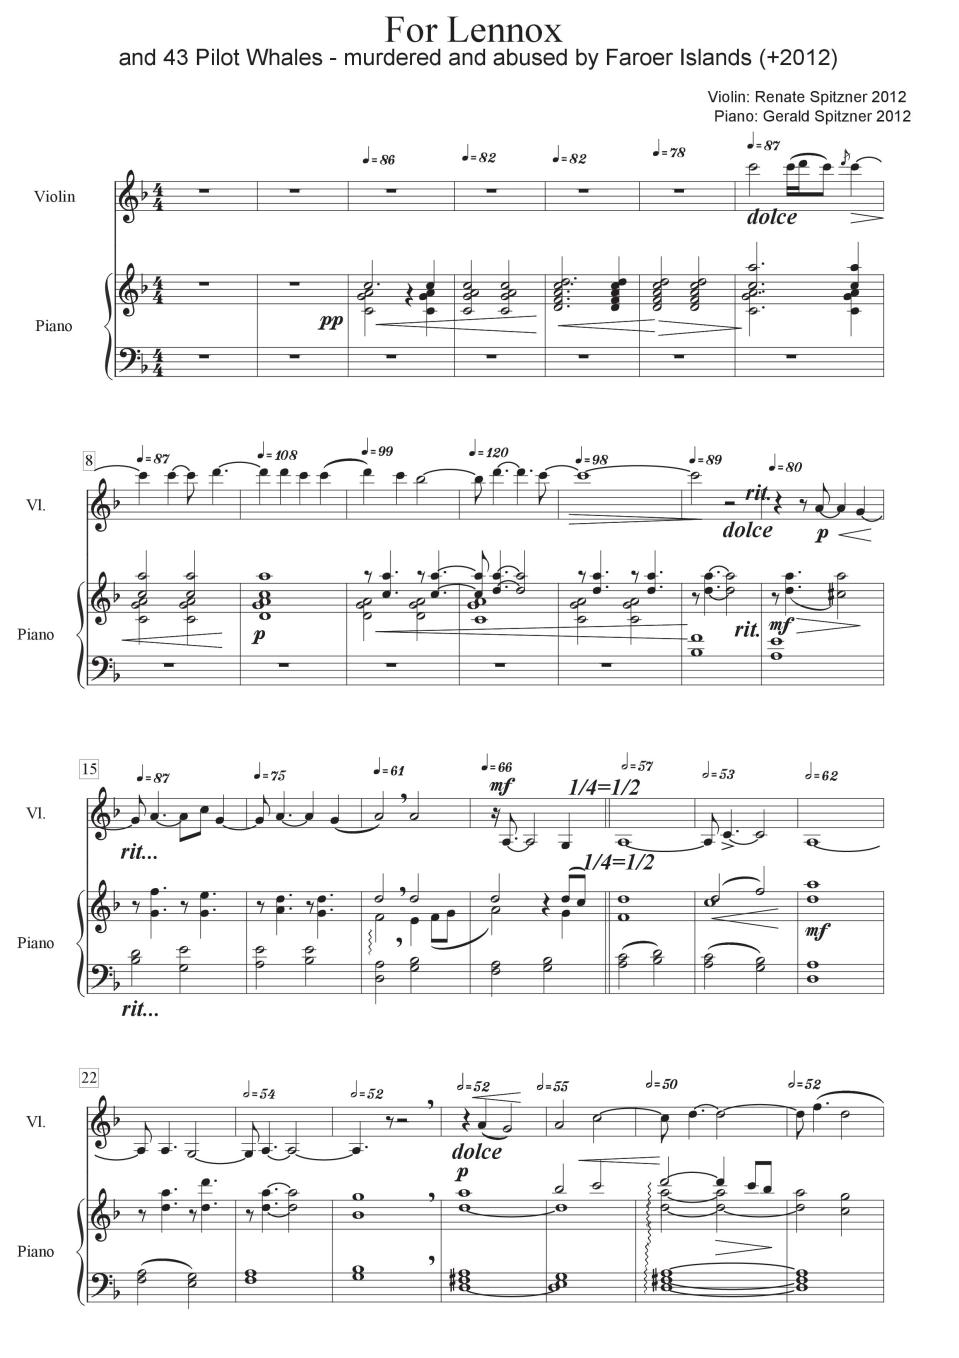 01 For Lennox and 43 Pilot whales - Violin and Piano RGS.pdf1